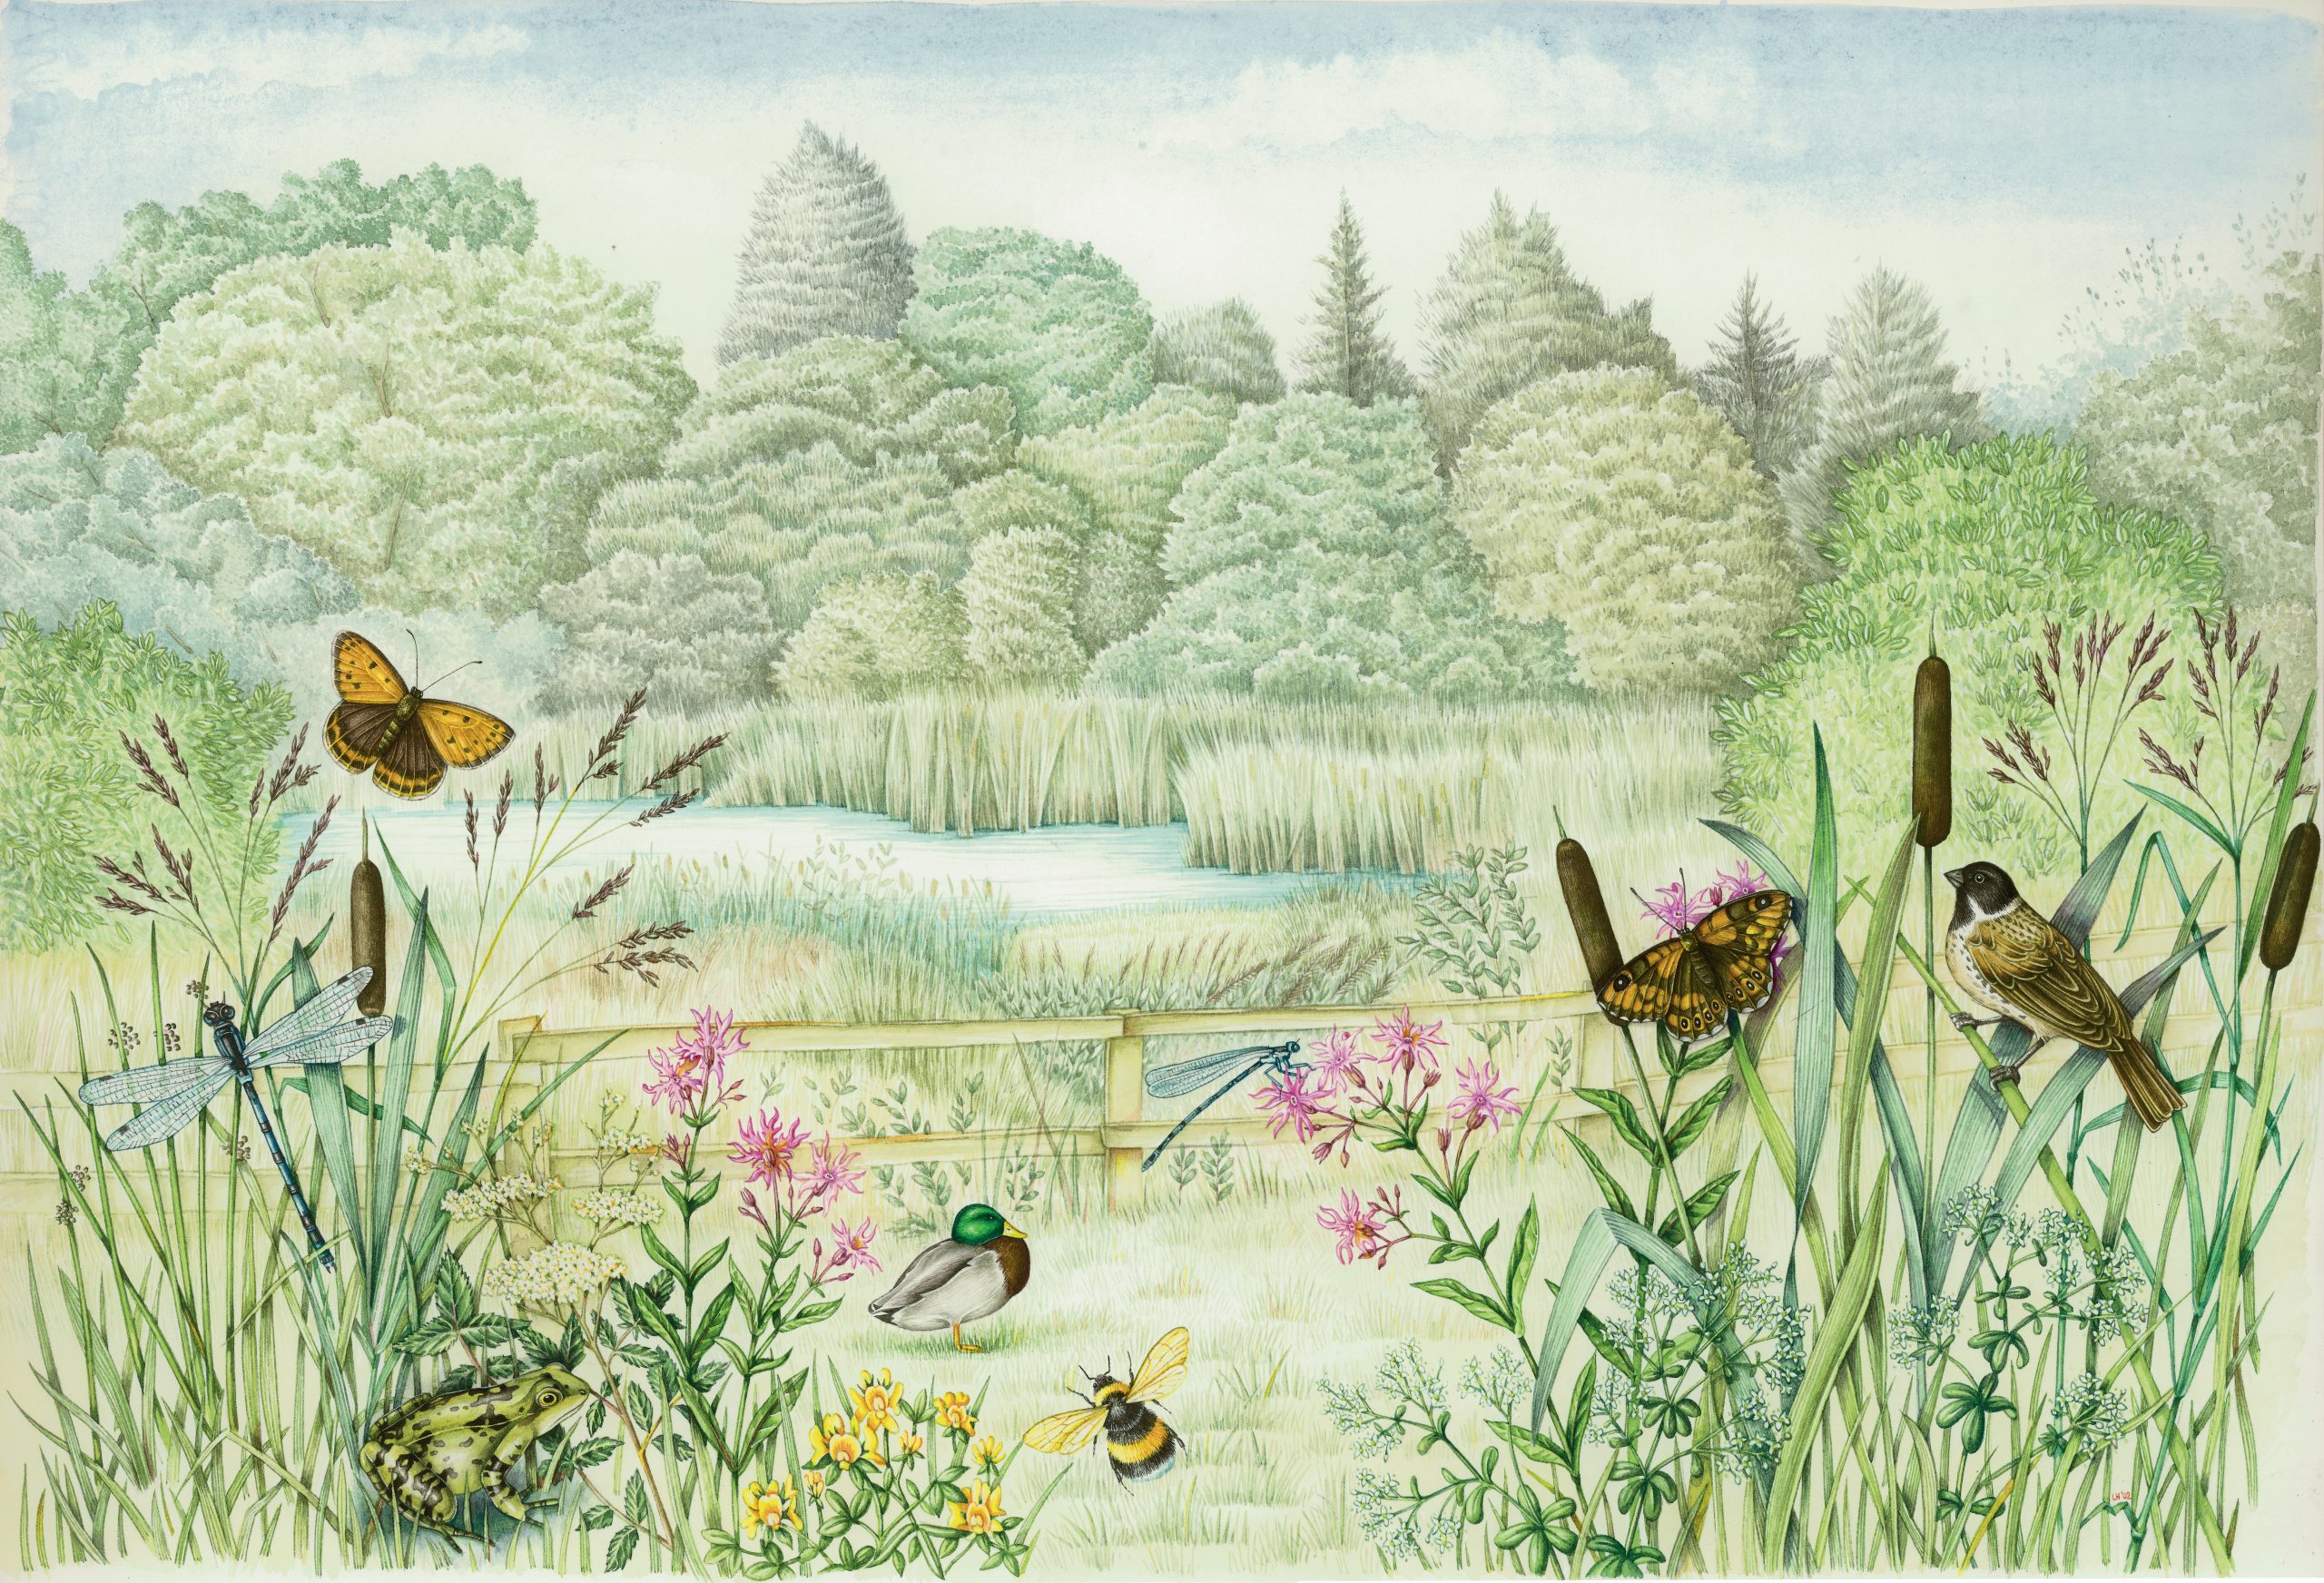 Country pool scene with insects and birds and a frog natural history illustration by Lizzie Harper